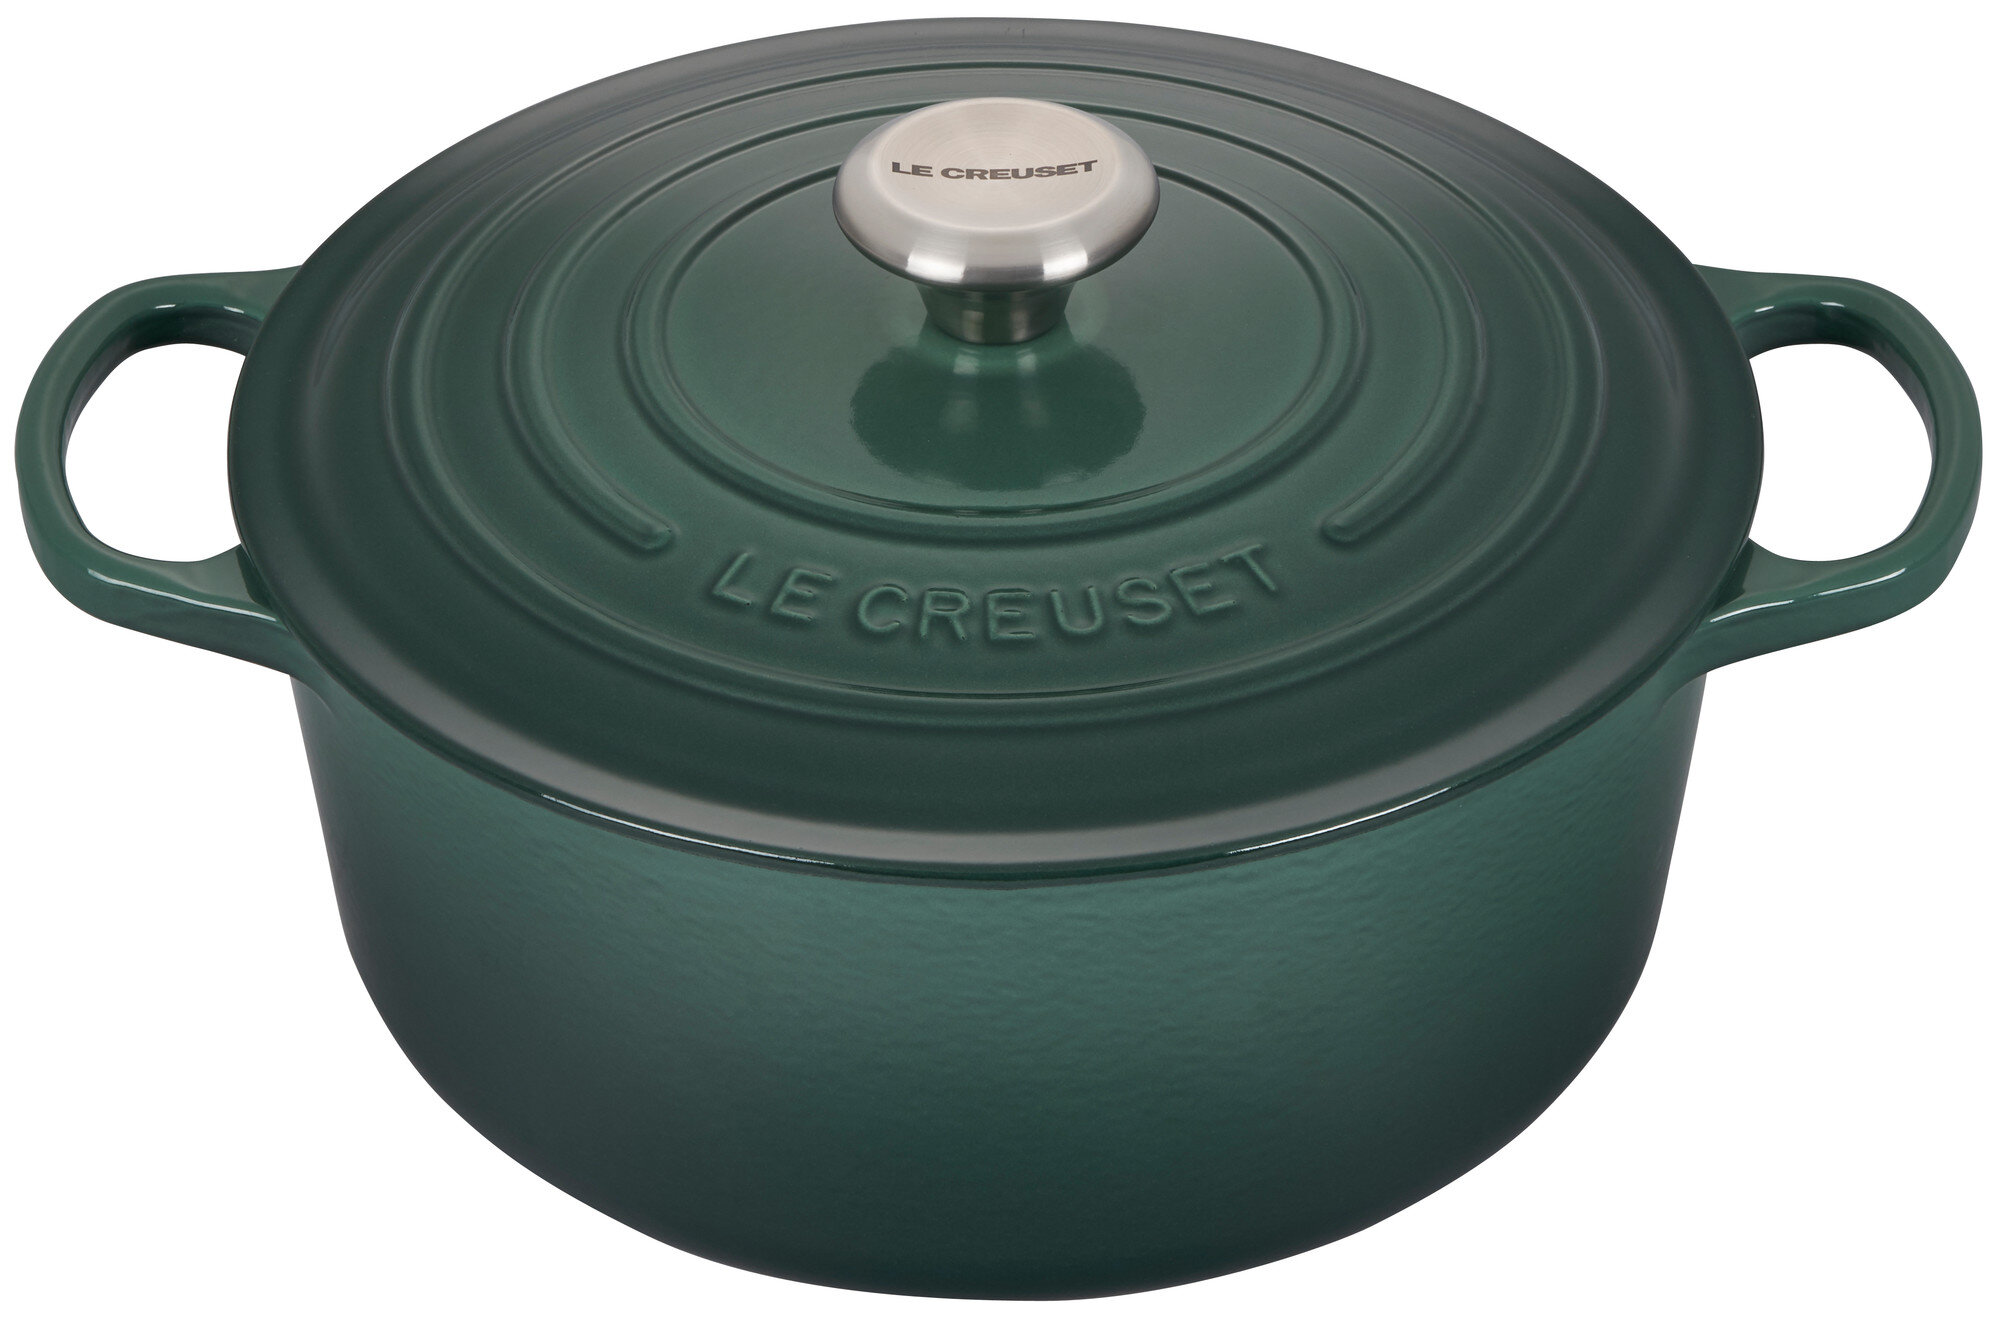 Le Creuset Signature Enameled Cast Iron 7.5 Qt Chef's Oven with